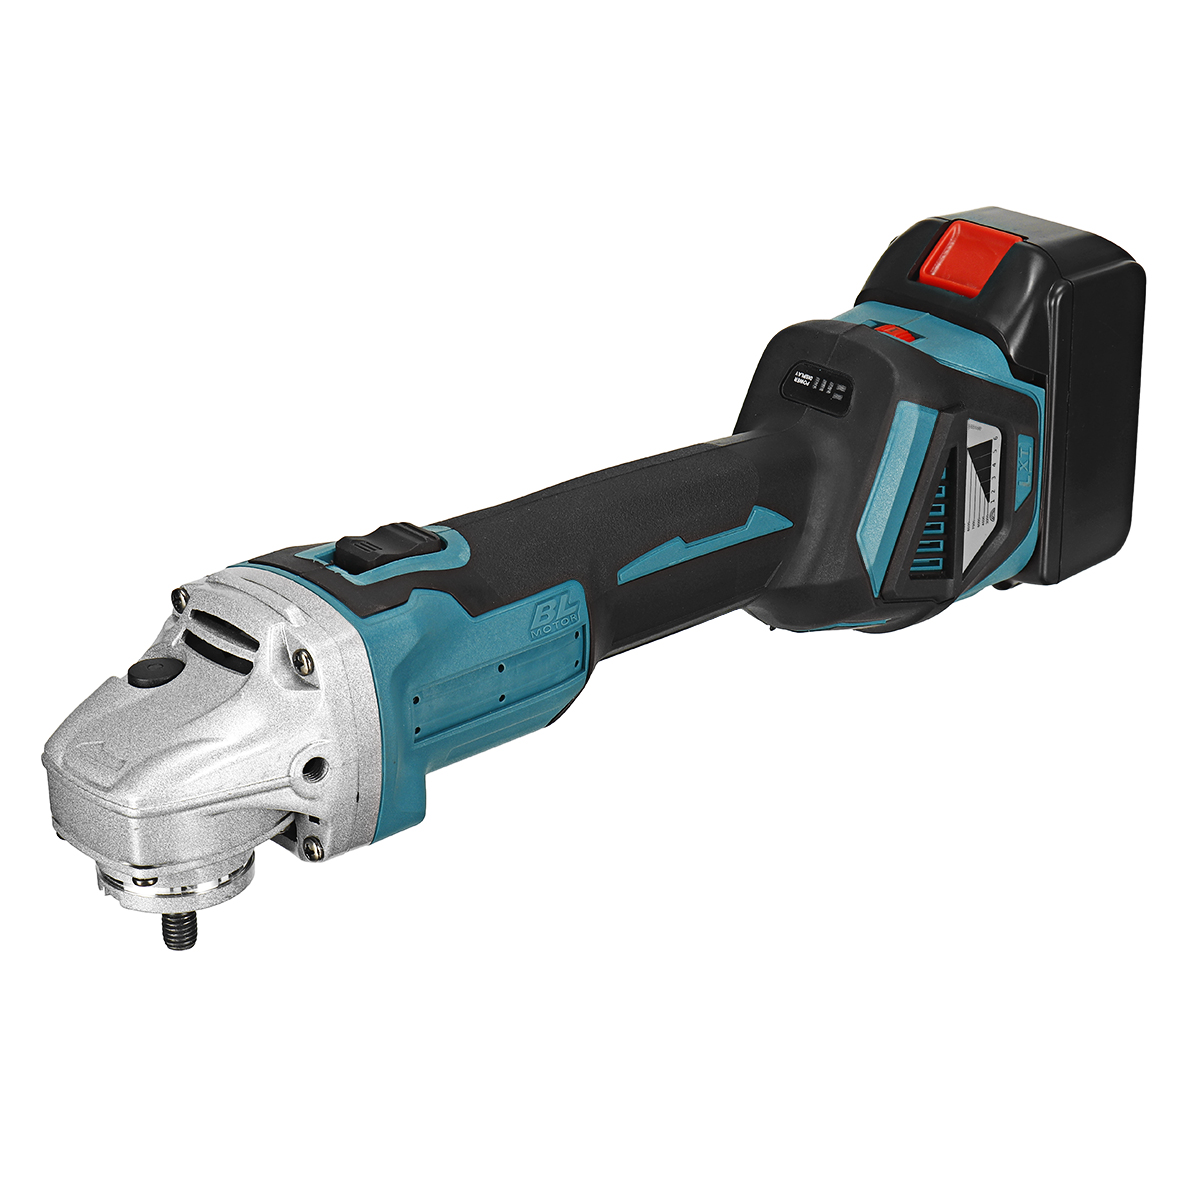 100mm-Brushless-Angle-Grinder-6-Gear-Adjustable-Electric-Polishing-Machine-W-1-or-2-Battery-1880202-7